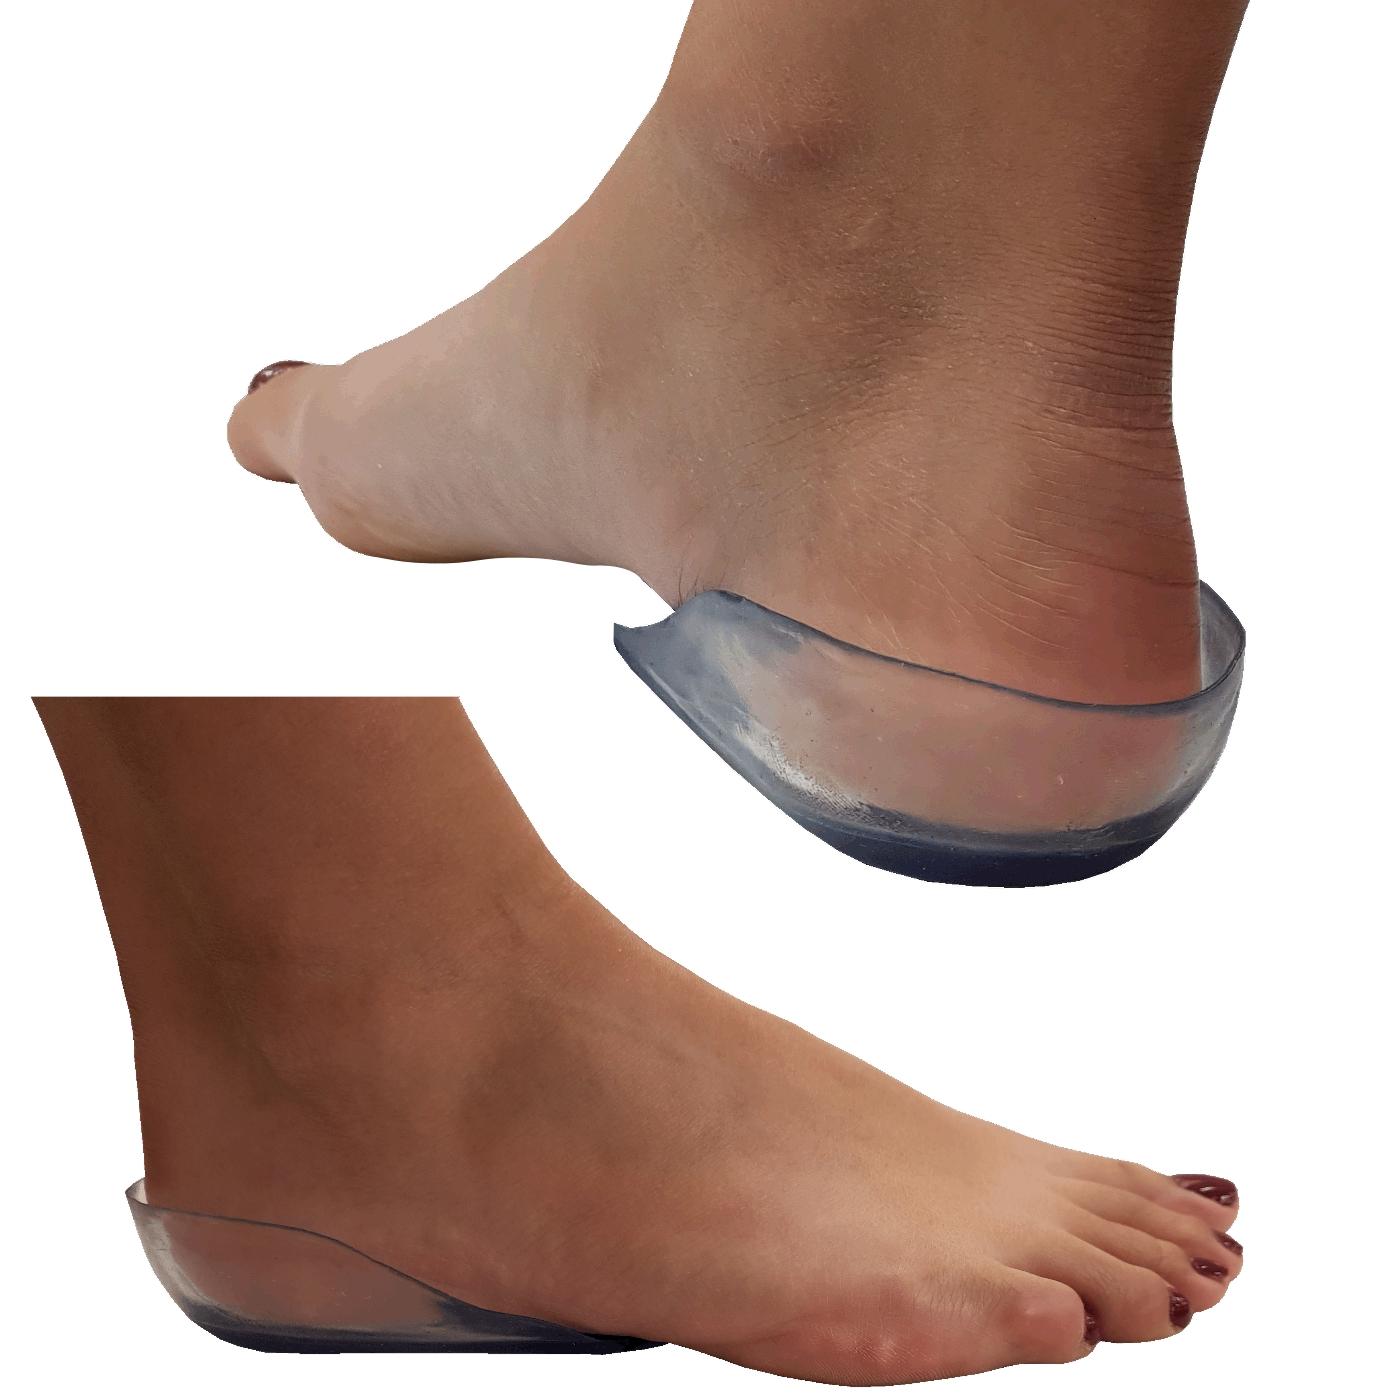 Medipaq Gel Heel Cup Supports Foot Feet Cushion Insole Pain Relief Pad ...